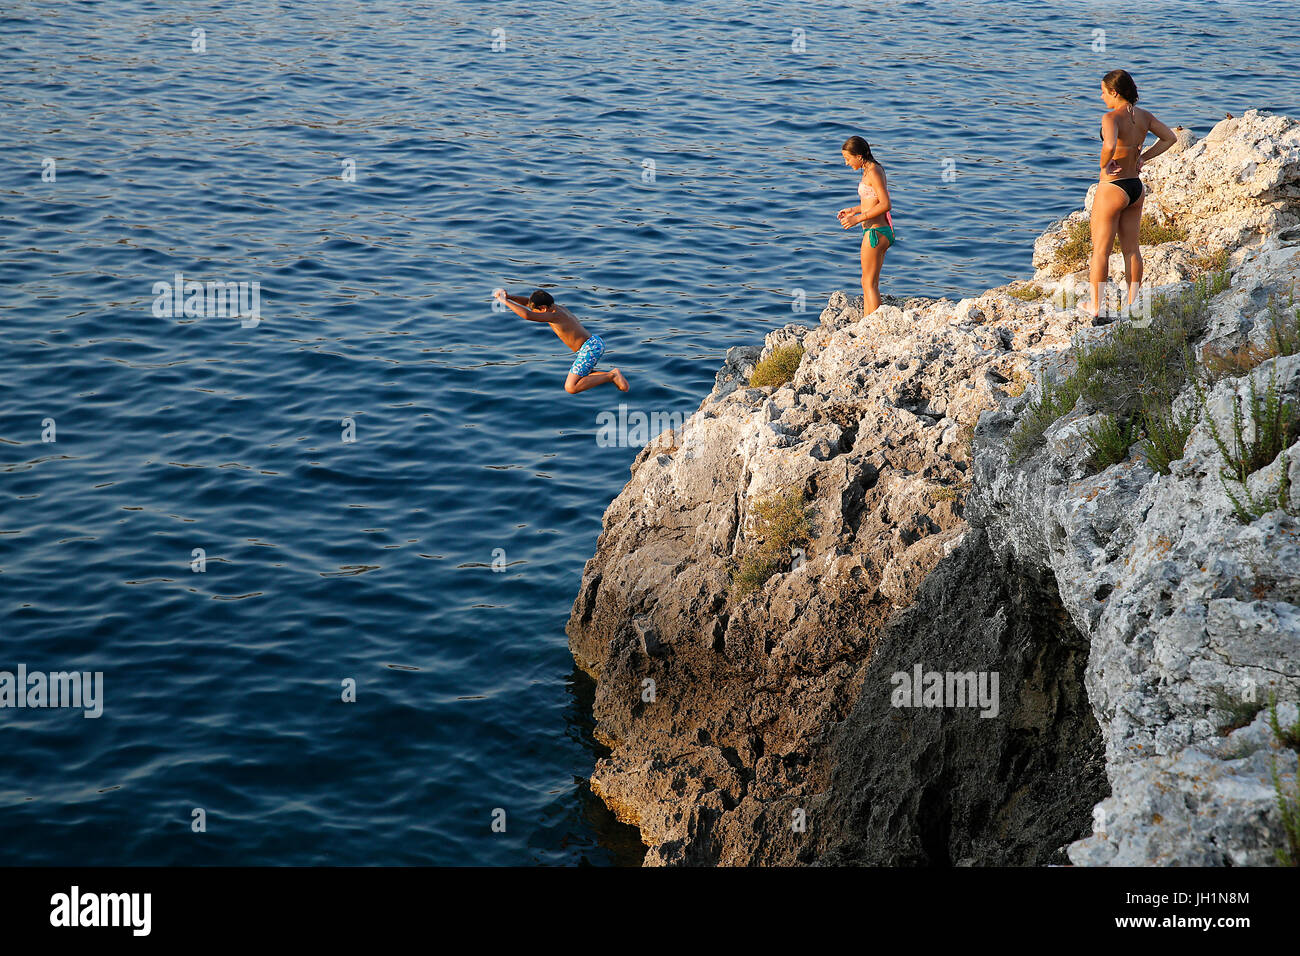 Boy jumping into the Med. Italy. Stock Photo